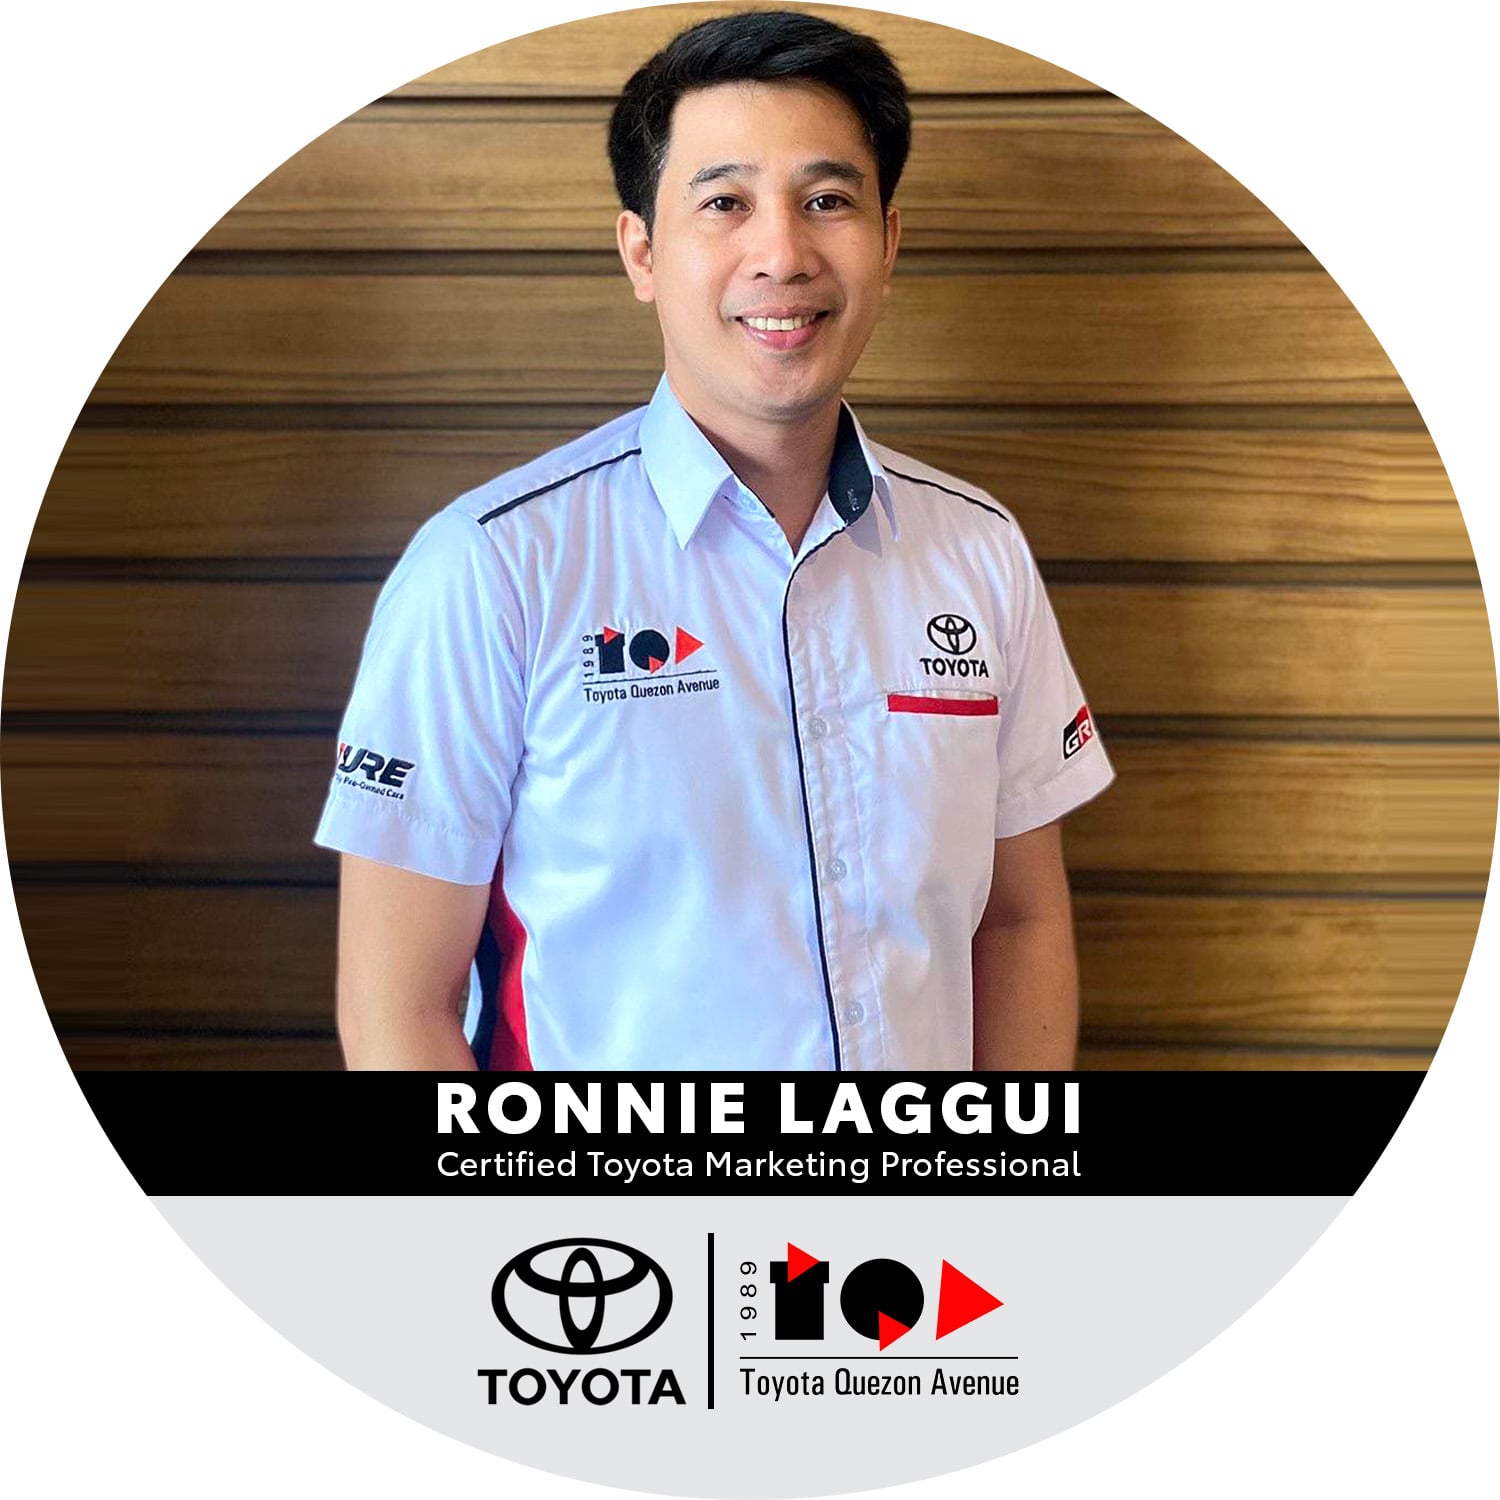 Certified Toyota Marketing Professionals - Ronnie Laggui